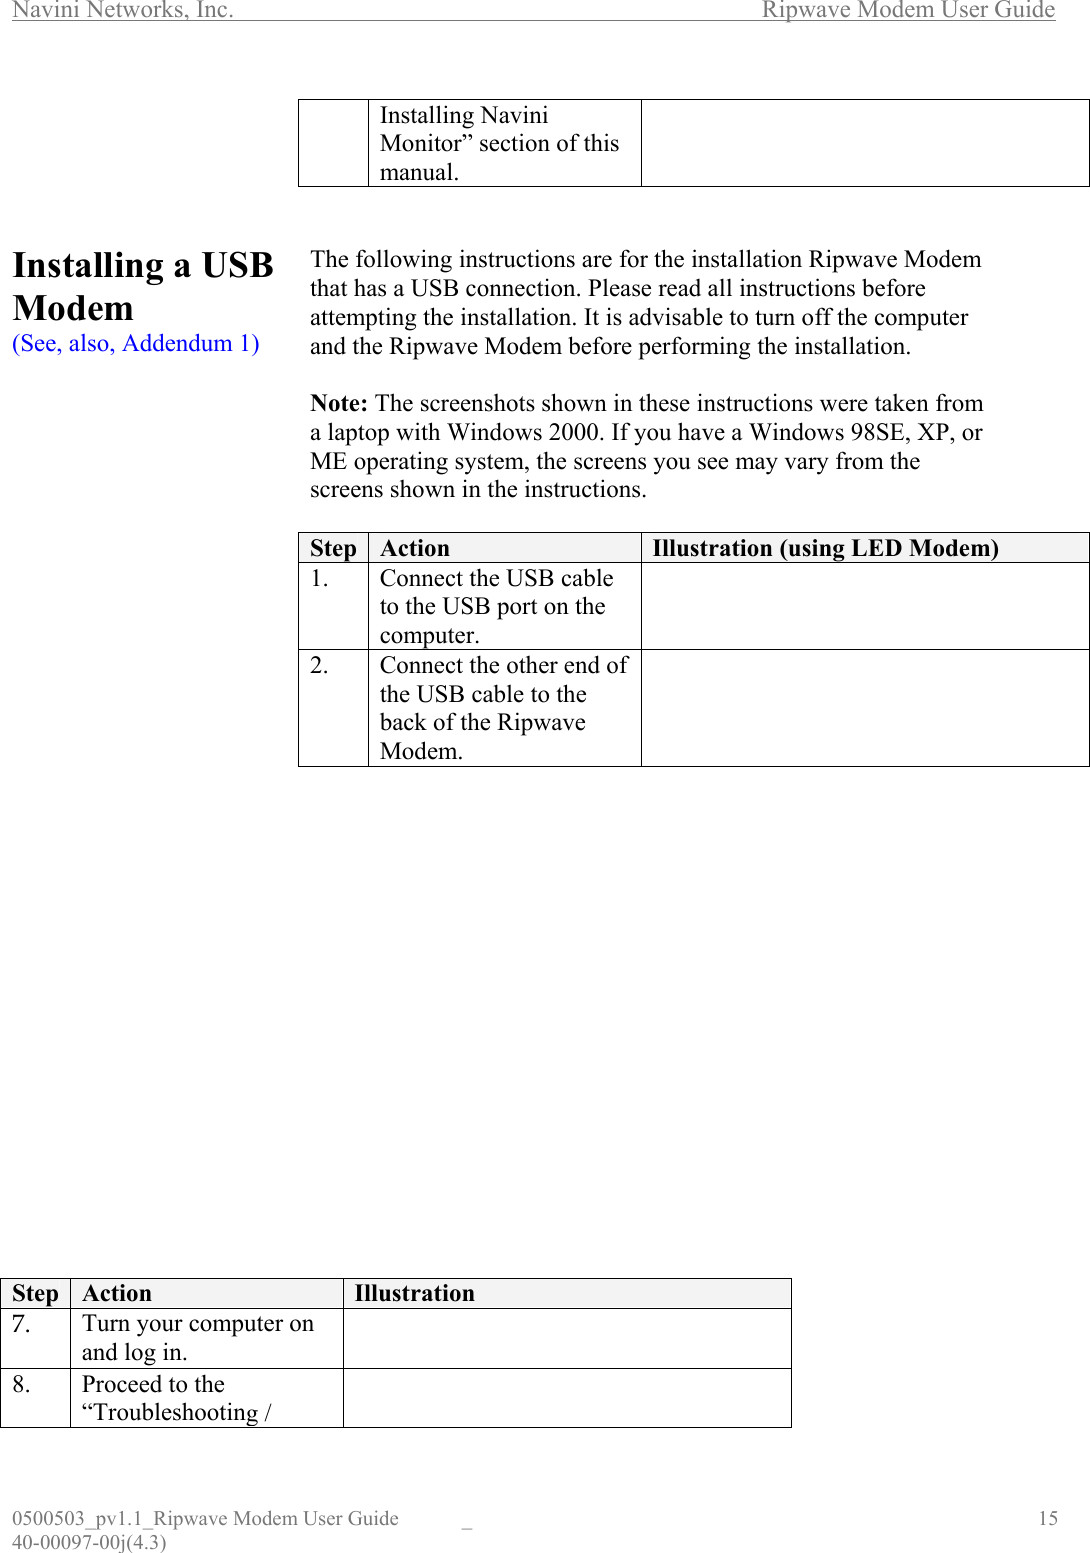 Navini Networks, Inc.        Ripwave Modem User Guide 0500503_pv1.1_Ripwave Modem User Guide  _                                    15 40-00097-00j(4.3)      Installing a USB Modem (See, also, Addendum 1)                                 Step  Action  Illustration  7.  Turn your computer on and log in.  8.  Proceed to the “Troubleshooting /  Installing Navini Monitor” section of this manual.   The following instructions are for the installation Ripwave Modem that has a USB connection. Please read all instructions before attempting the installation. It is advisable to turn off the computer and the Ripwave Modem before performing the installation.  Note: The screenshots shown in these instructions were taken from a laptop with Windows 2000. If you have a Windows 98SE, XP, or ME operating system, the screens you see may vary from the screens shown in the instructions.  Step  Action  Illustration (using LED Modem) 1.  Connect the USB cable to the USB port on the computer.  2.  Connect the other end of the USB cable to the back of the Ripwave Modem.   